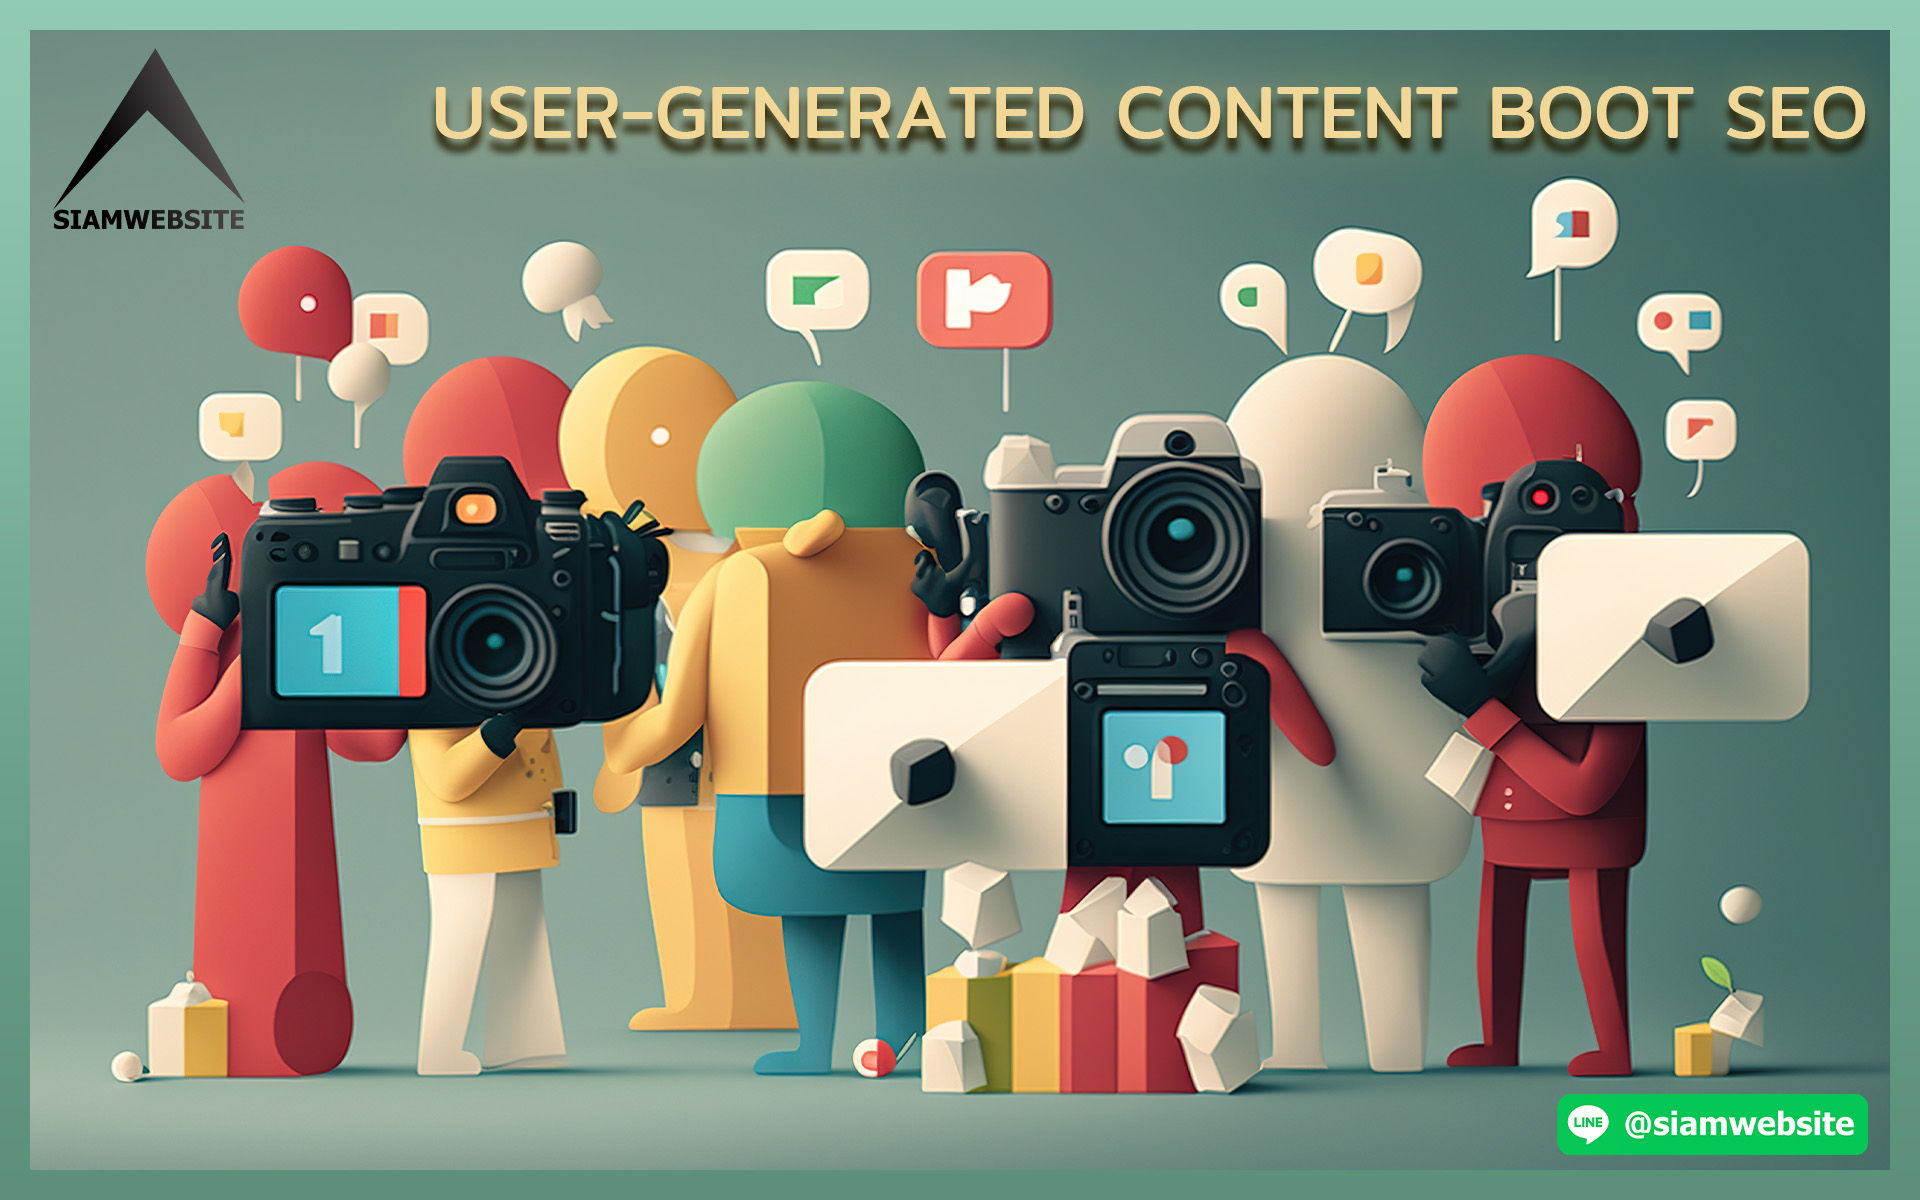 USER-GENERATED CONTENT BOOT SEO